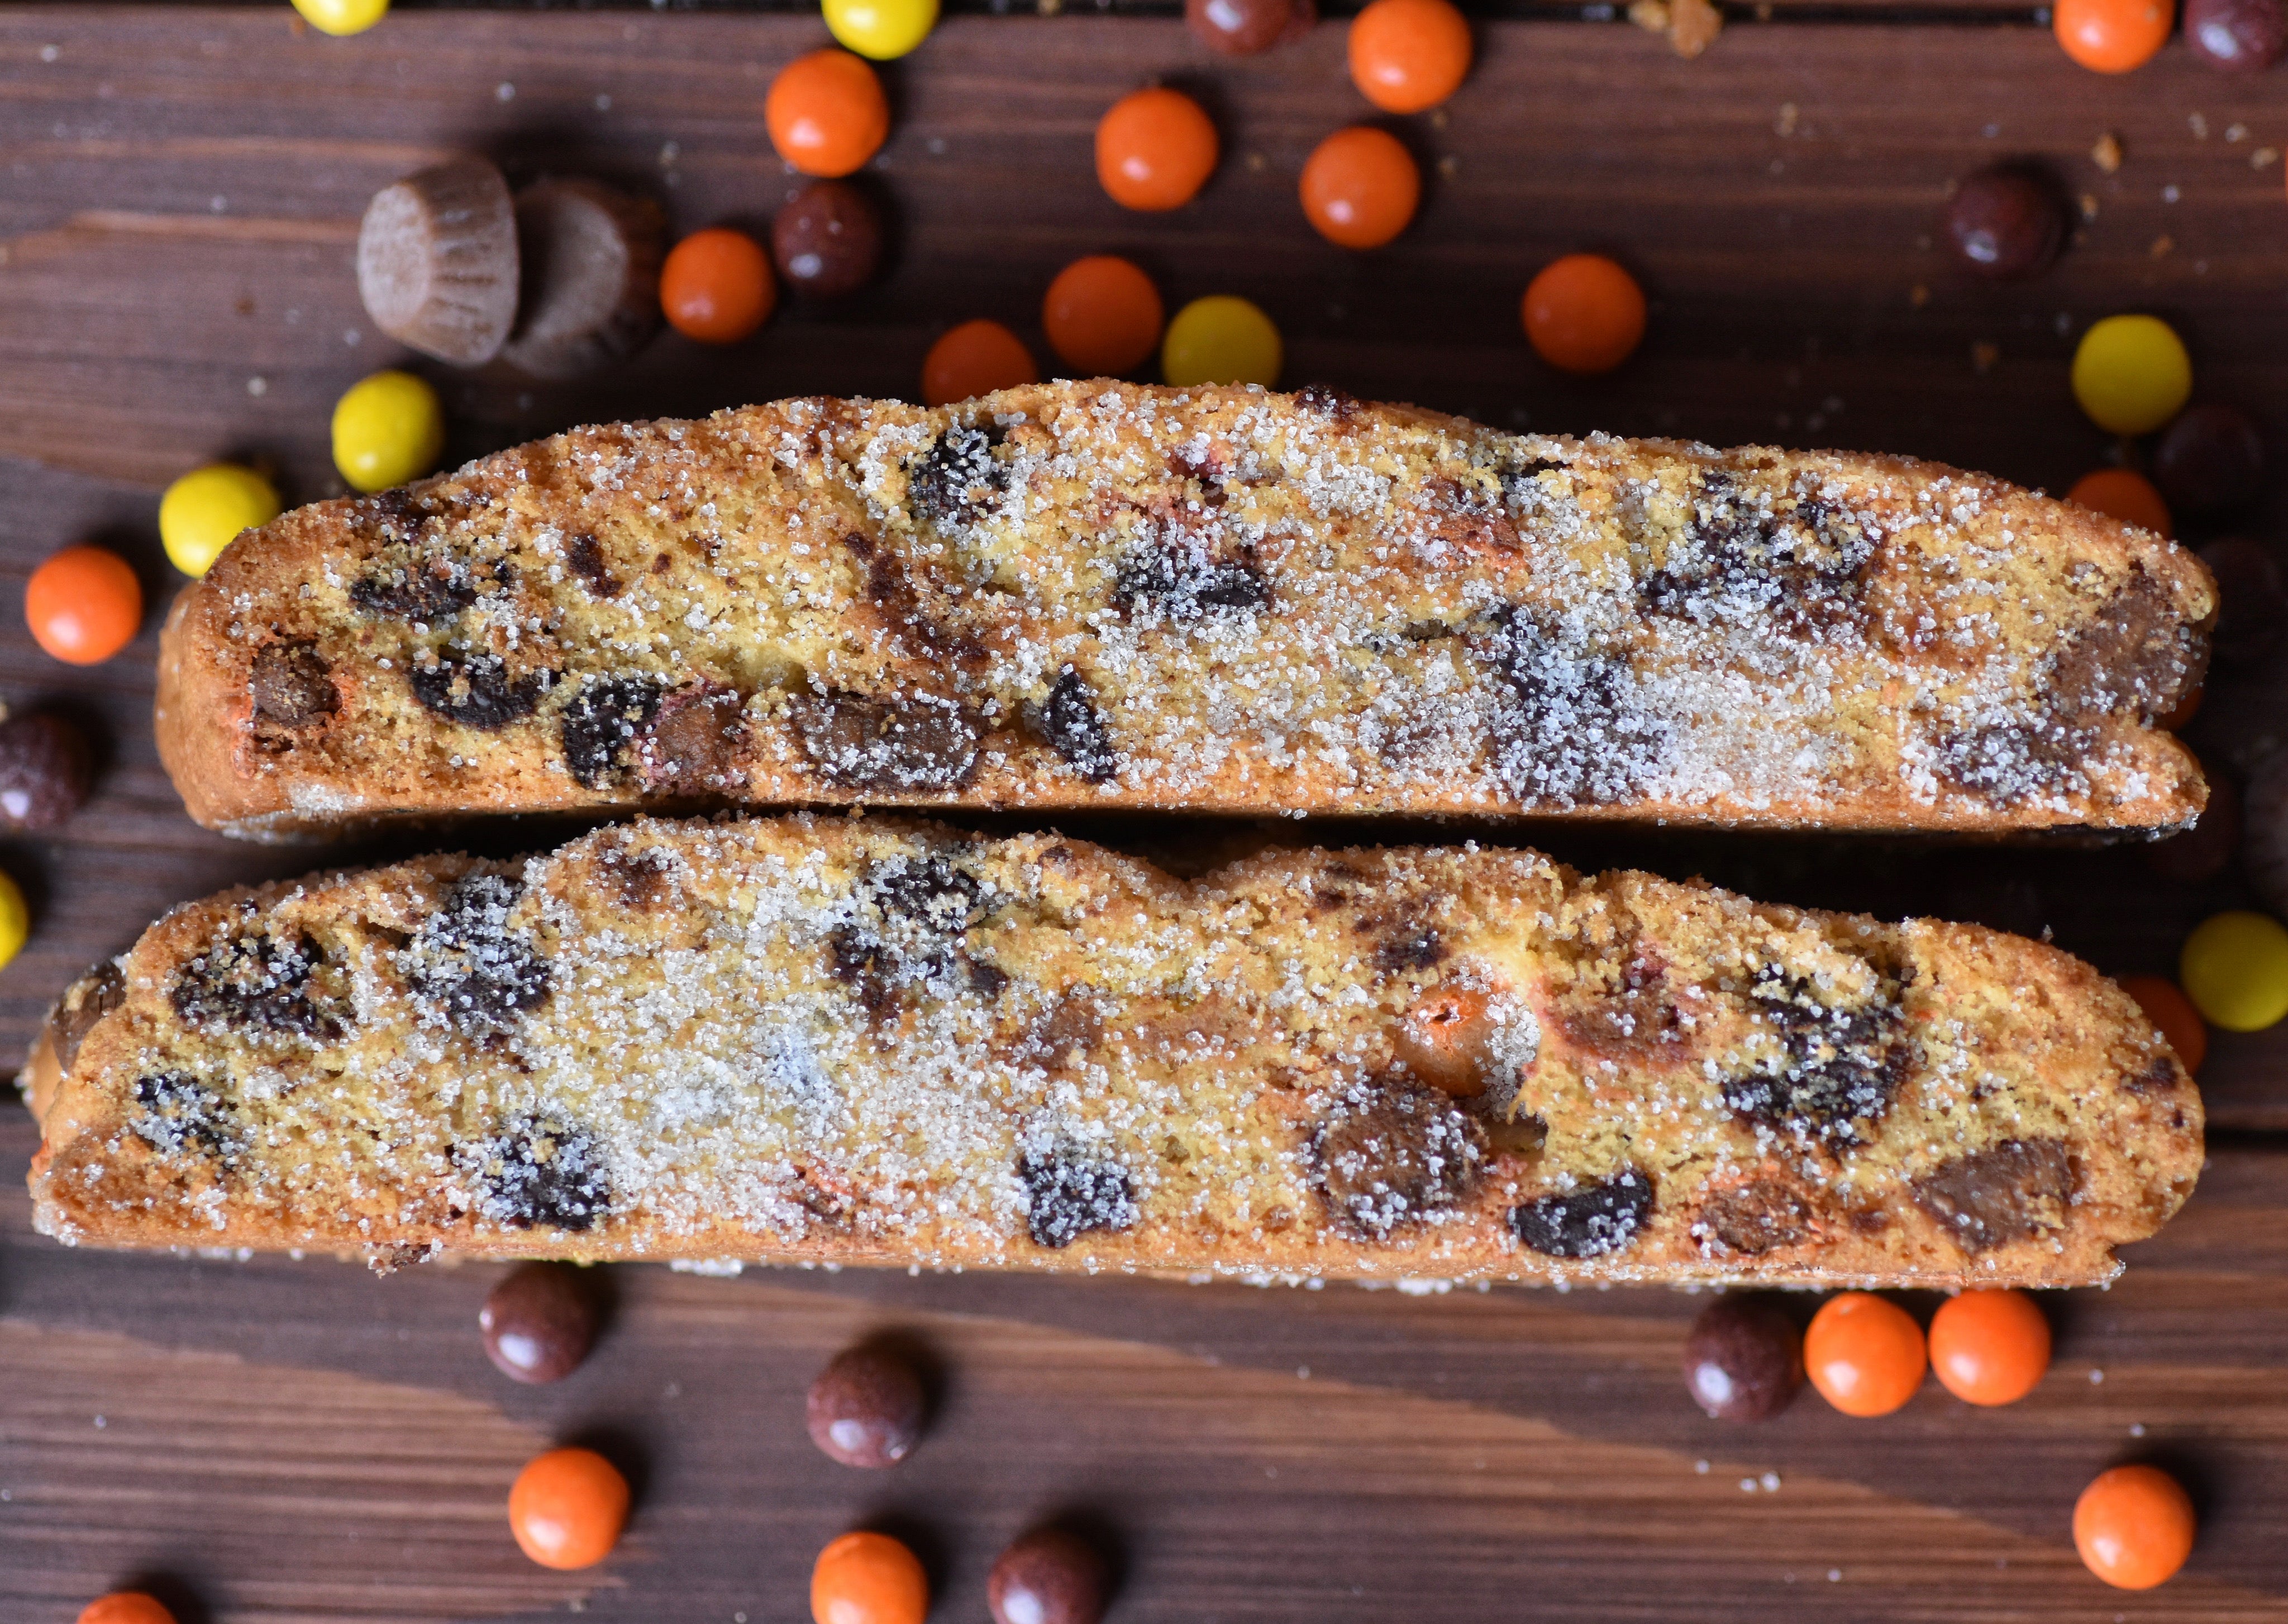 REESE'S PIECES PEANUT BUTTER CUP MANDEL BREAD